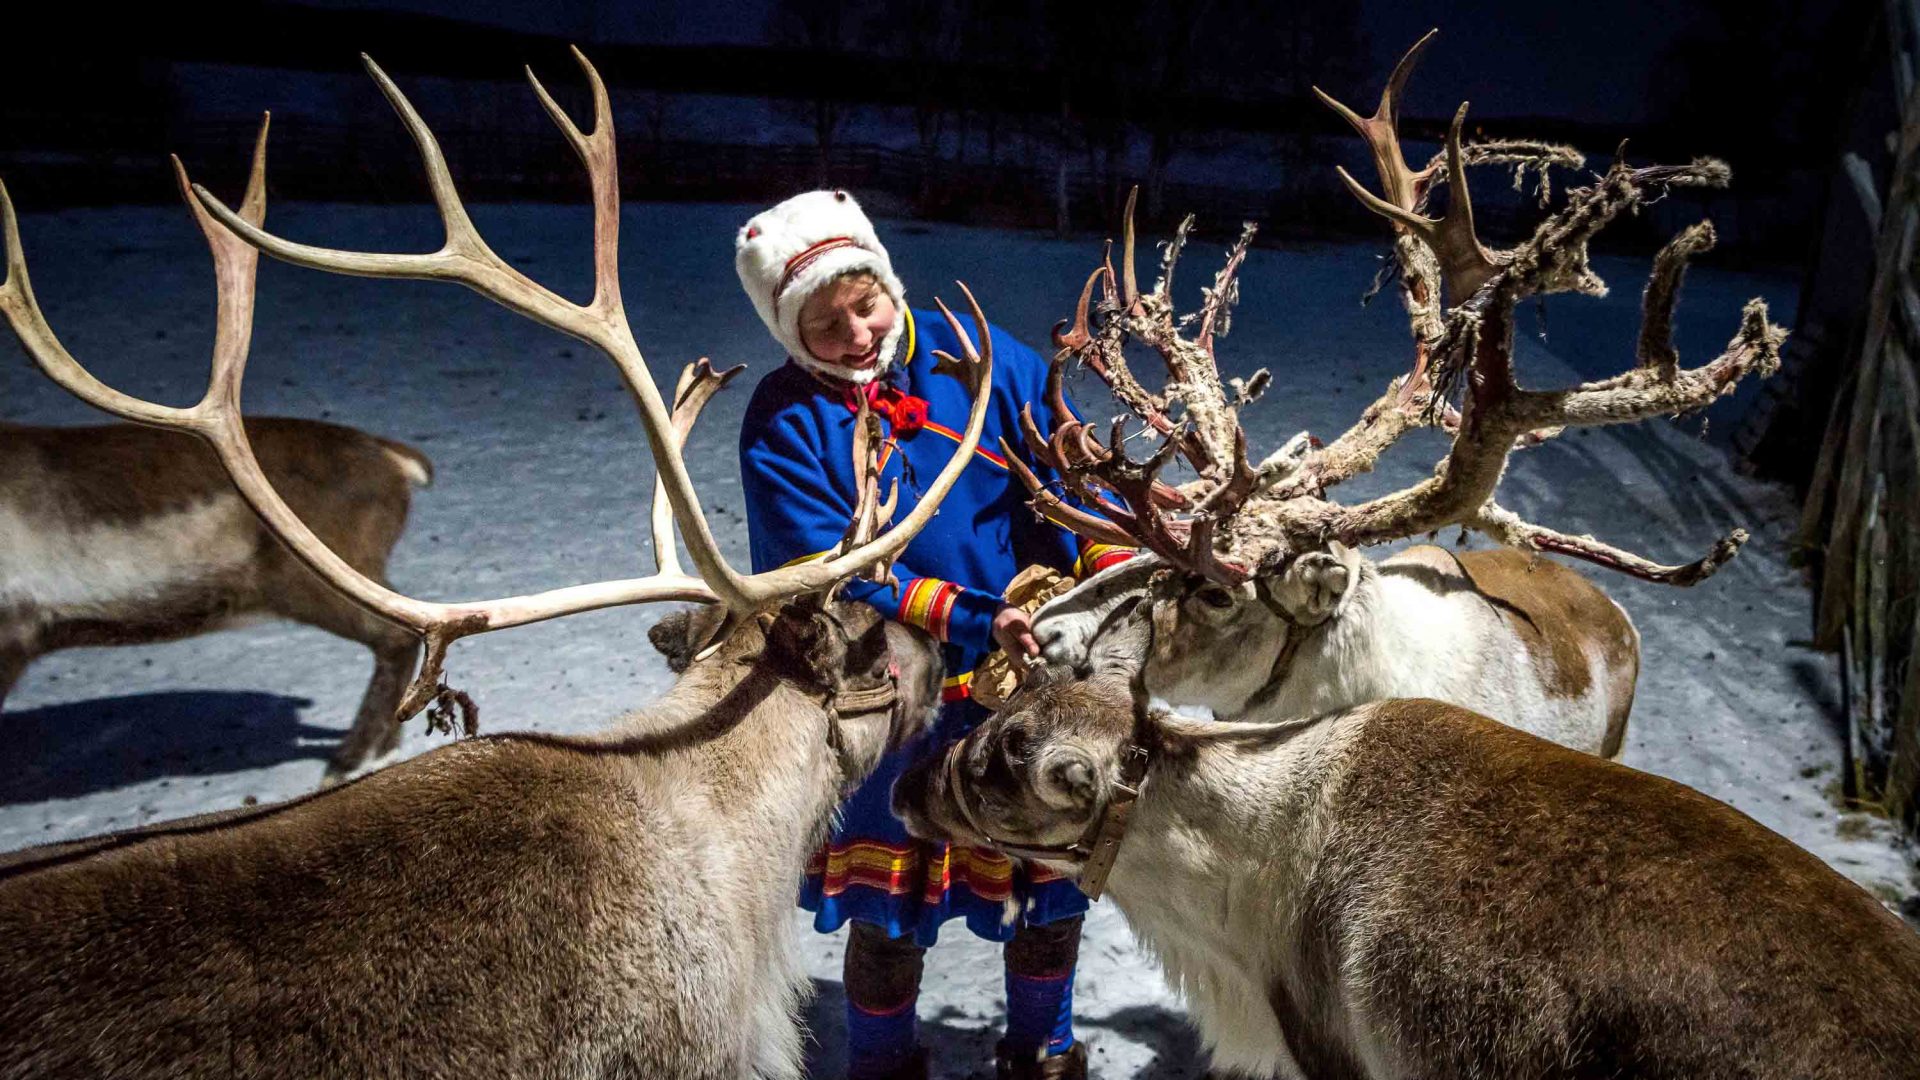 In photos: Life lessons from Sweden’s reindeer herders